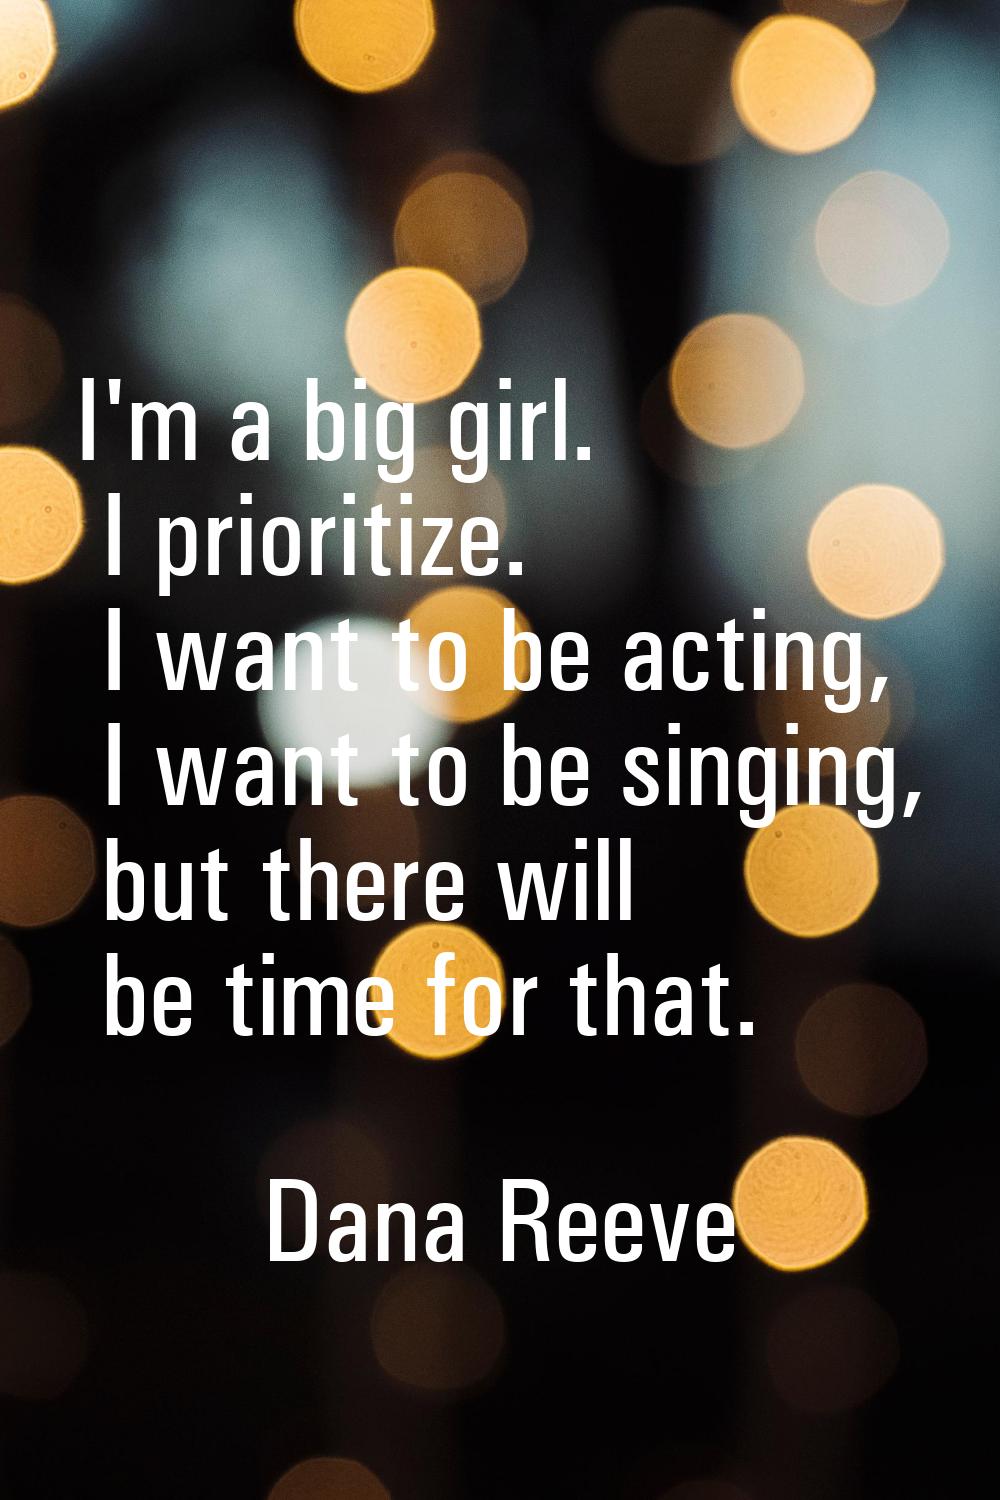 I'm a big girl. I prioritize. I want to be acting, I want to be singing, but there will be time for